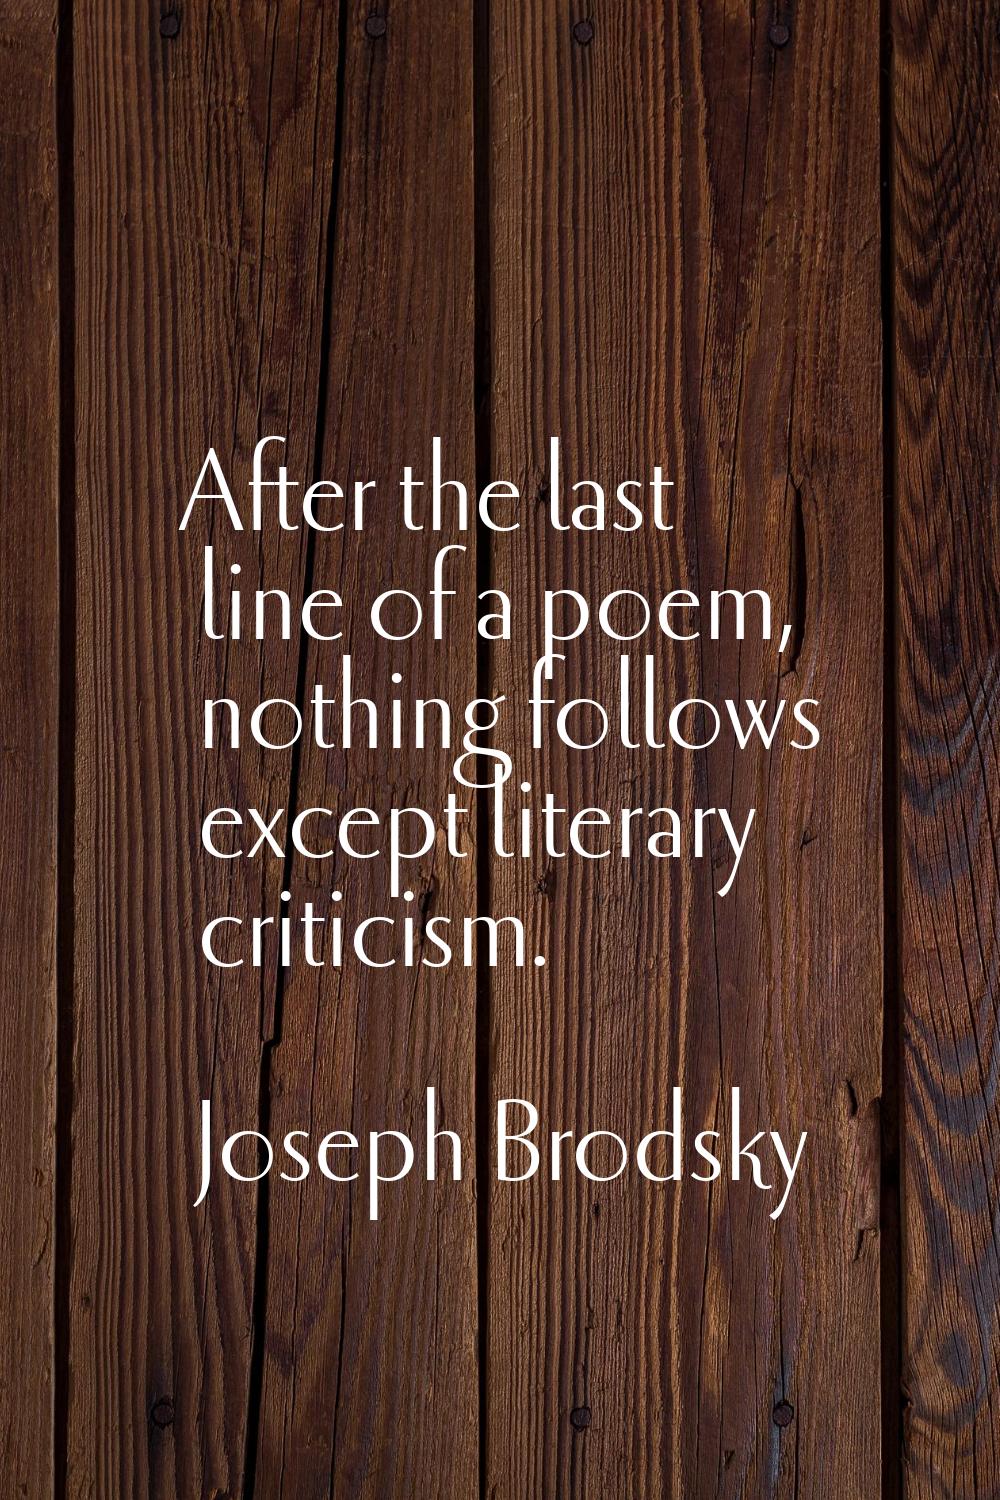 After the last line of a poem, nothing follows except literary criticism.